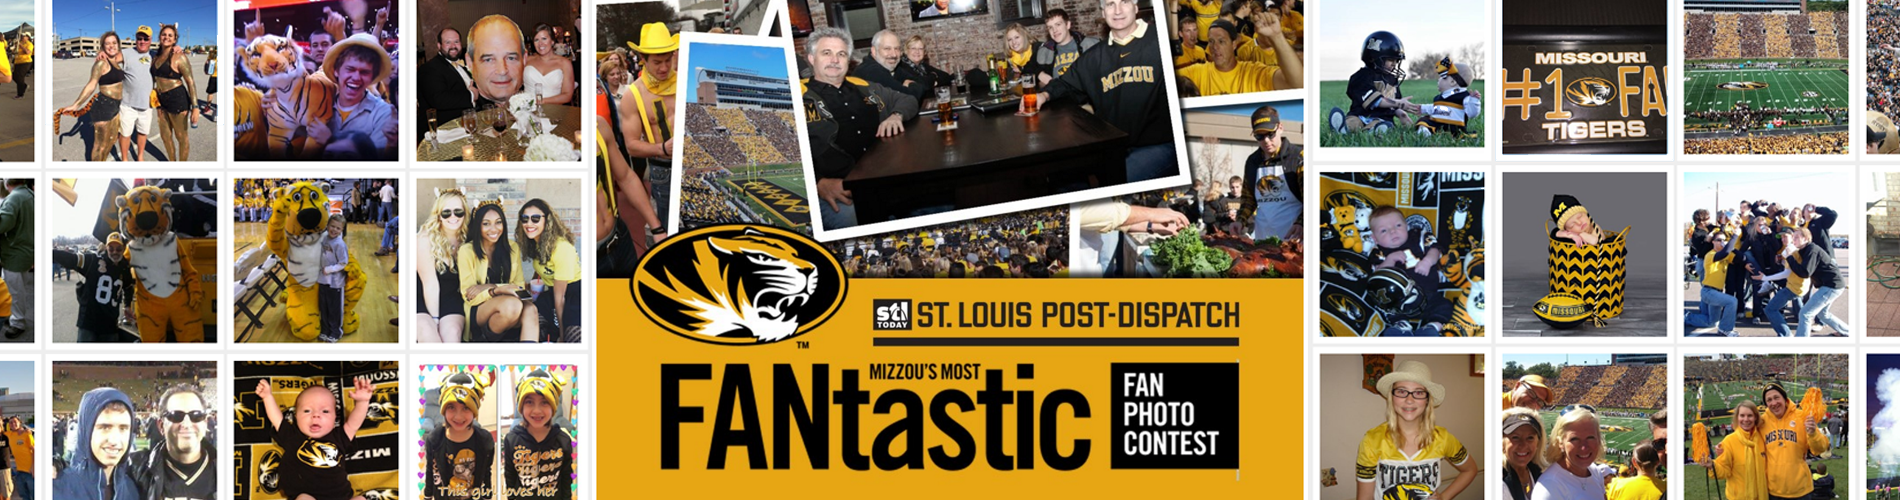 College Football Photo Contest Drives $18K for Paper | Second Street Lab